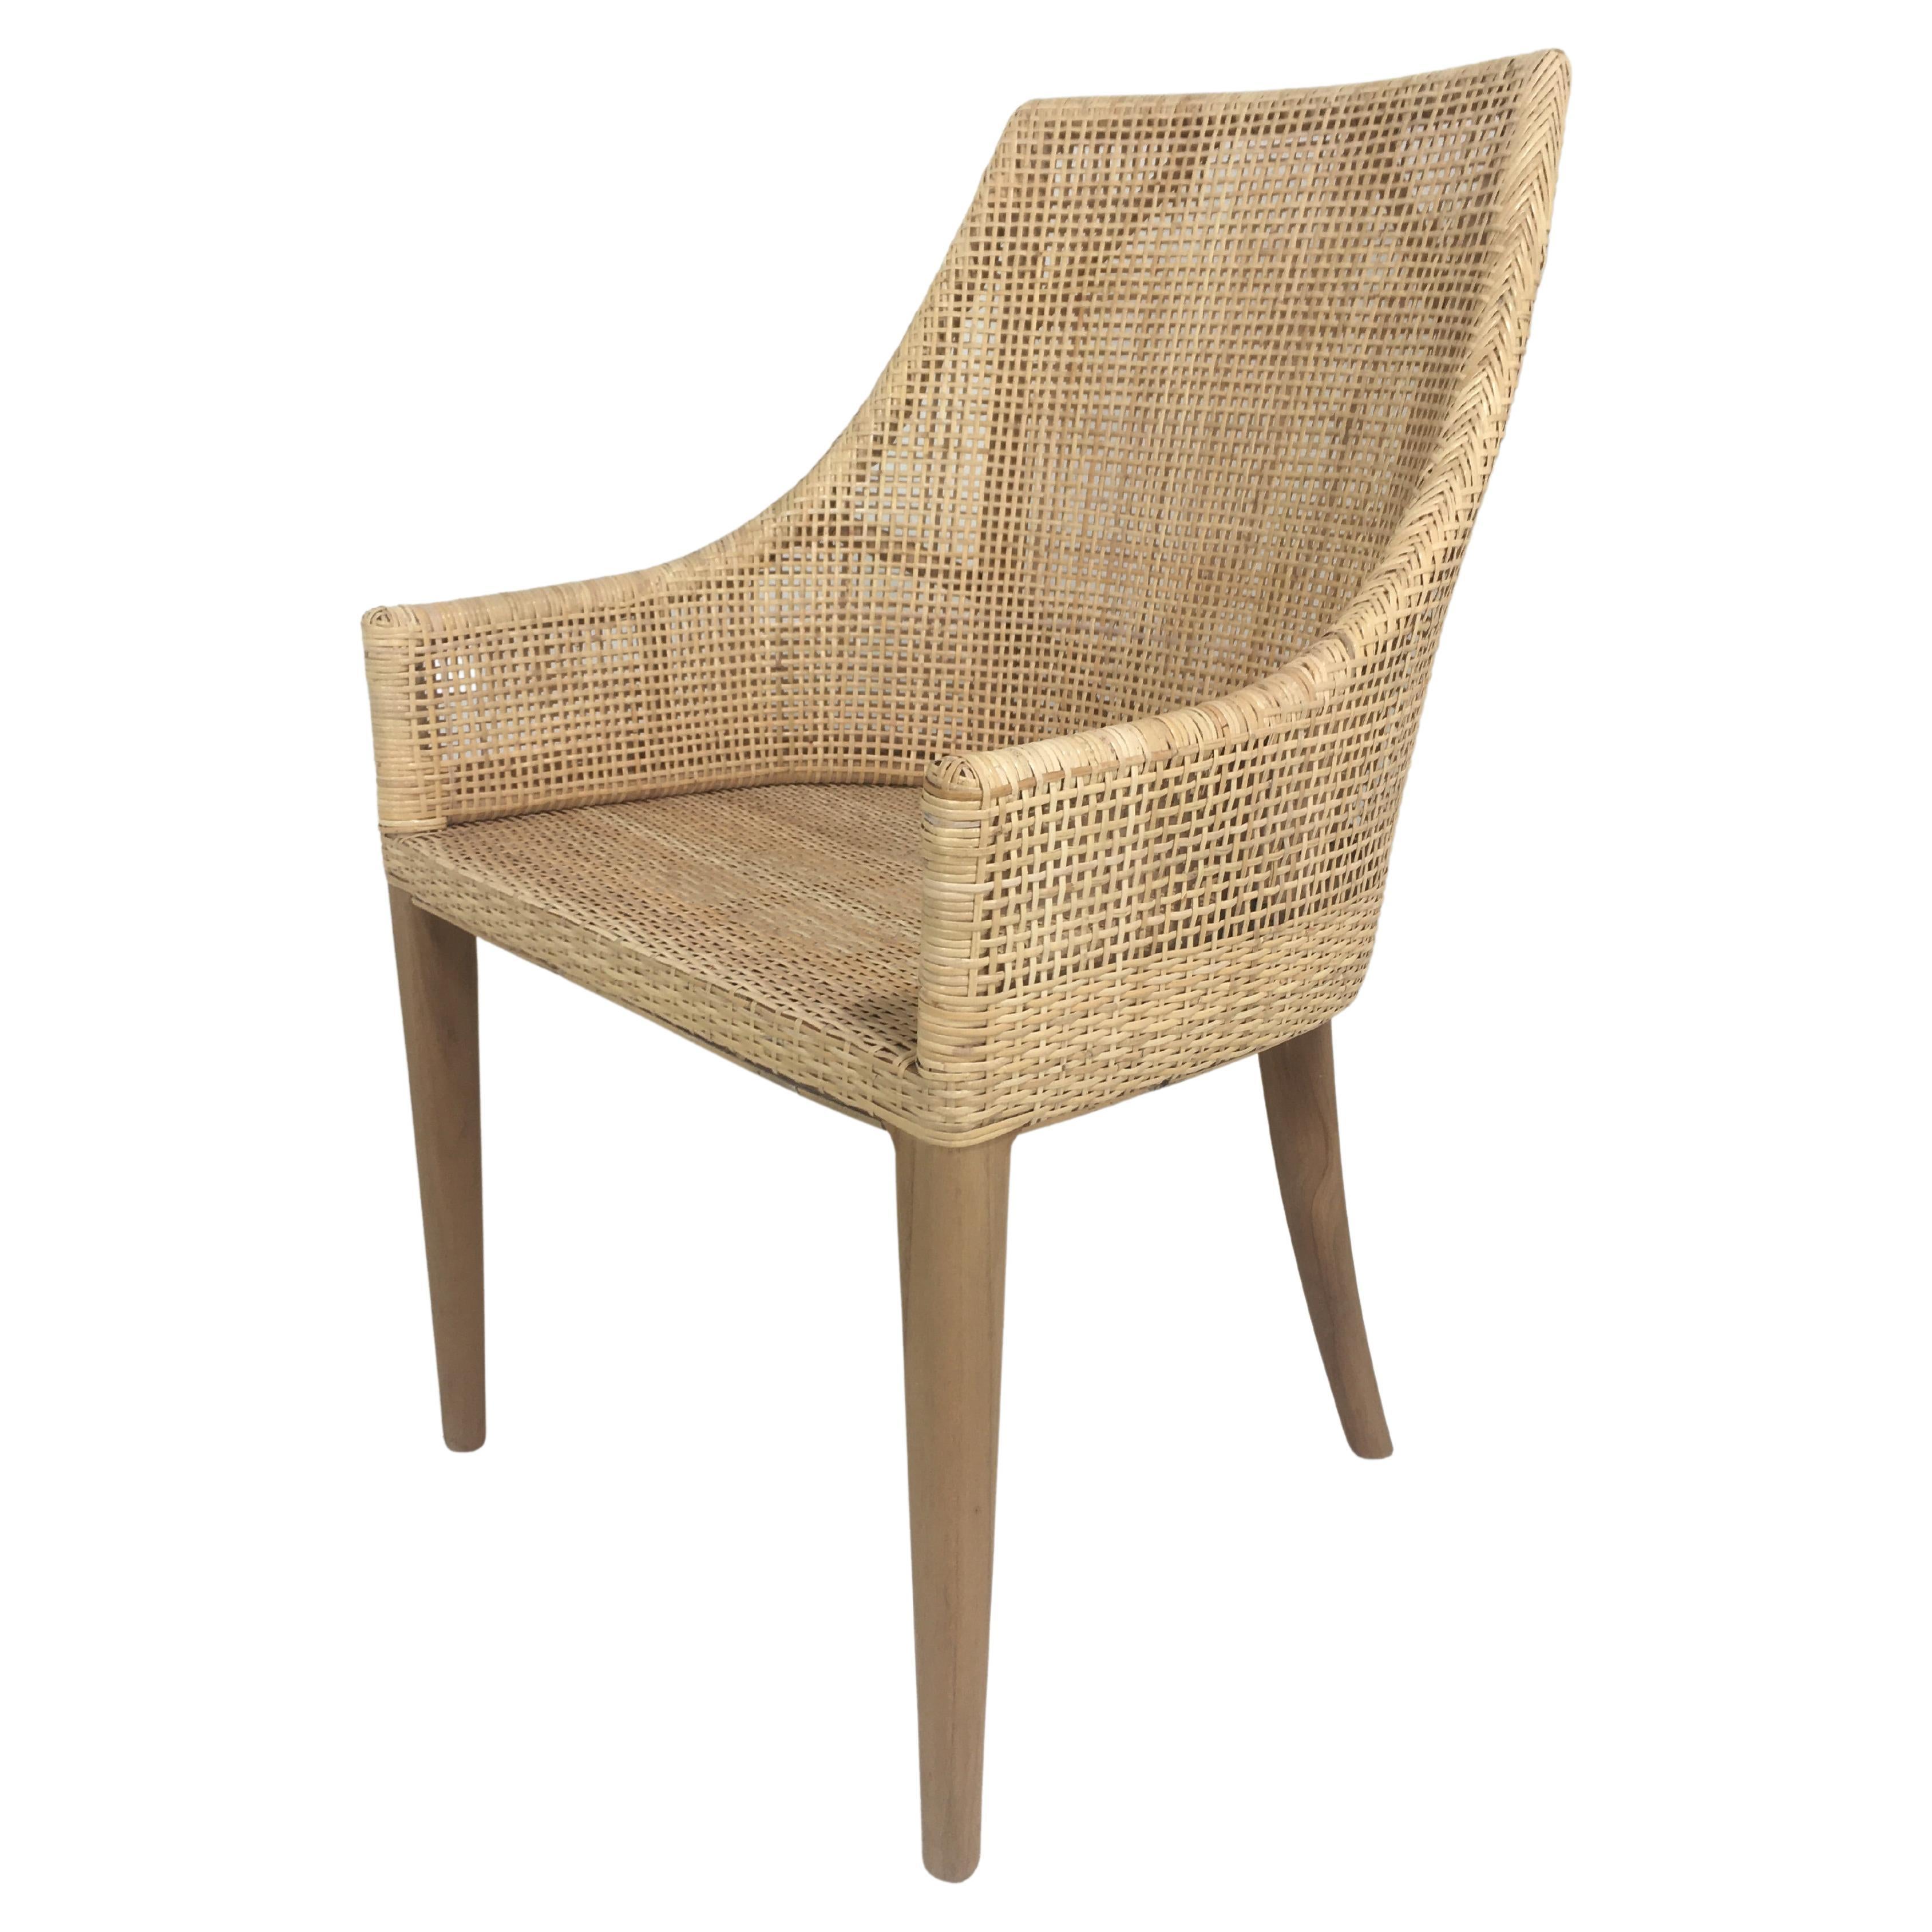 Elegant set of six rattan chairs with a natural teak wooden structure and handcrafted braided rattan seat combining quality, robustness and class. They will be perfect on your terrace, in your veranda, your winter garden, around the dining table and